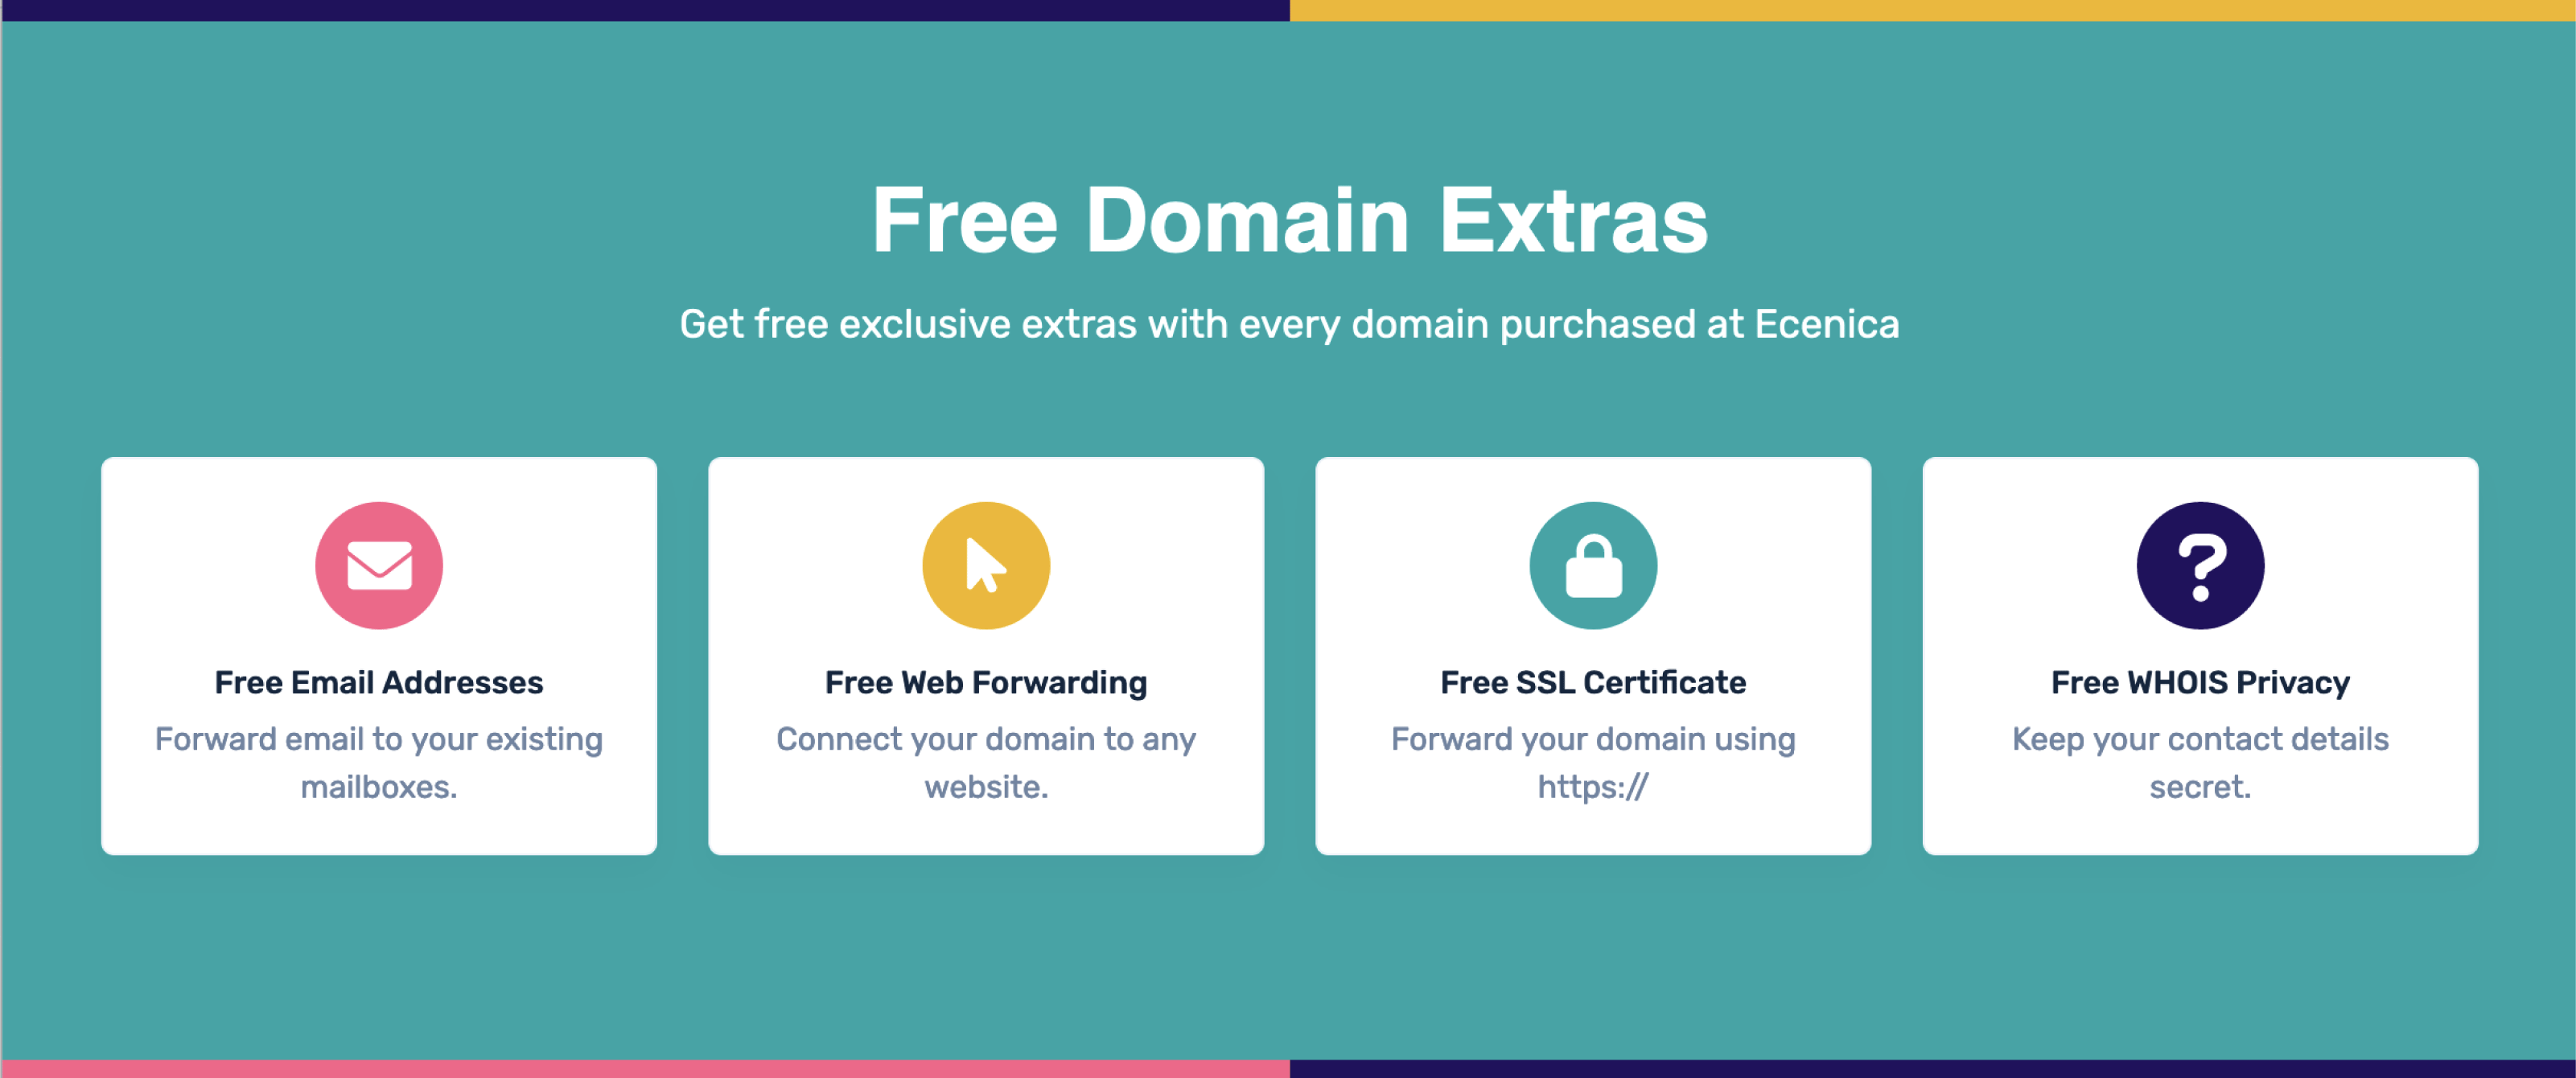 Free Domain Extras Included with every Ecenica domain registration.